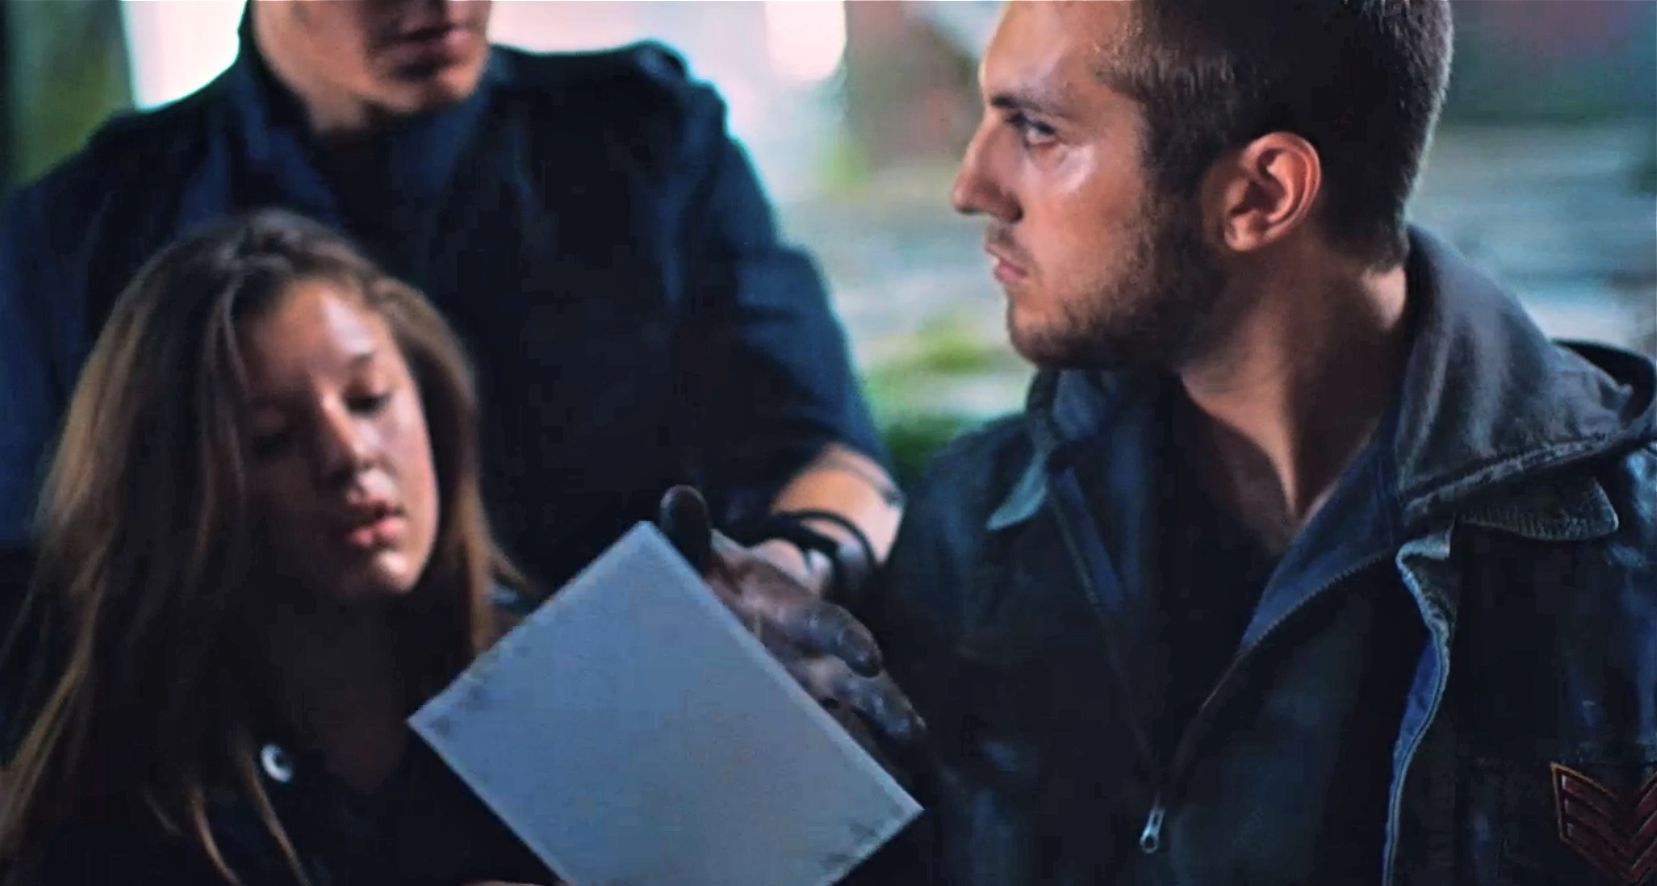 Still of Niki Cipriano (front left), and Gino Borri (right) in Lost In The Echo, by Linkin Park